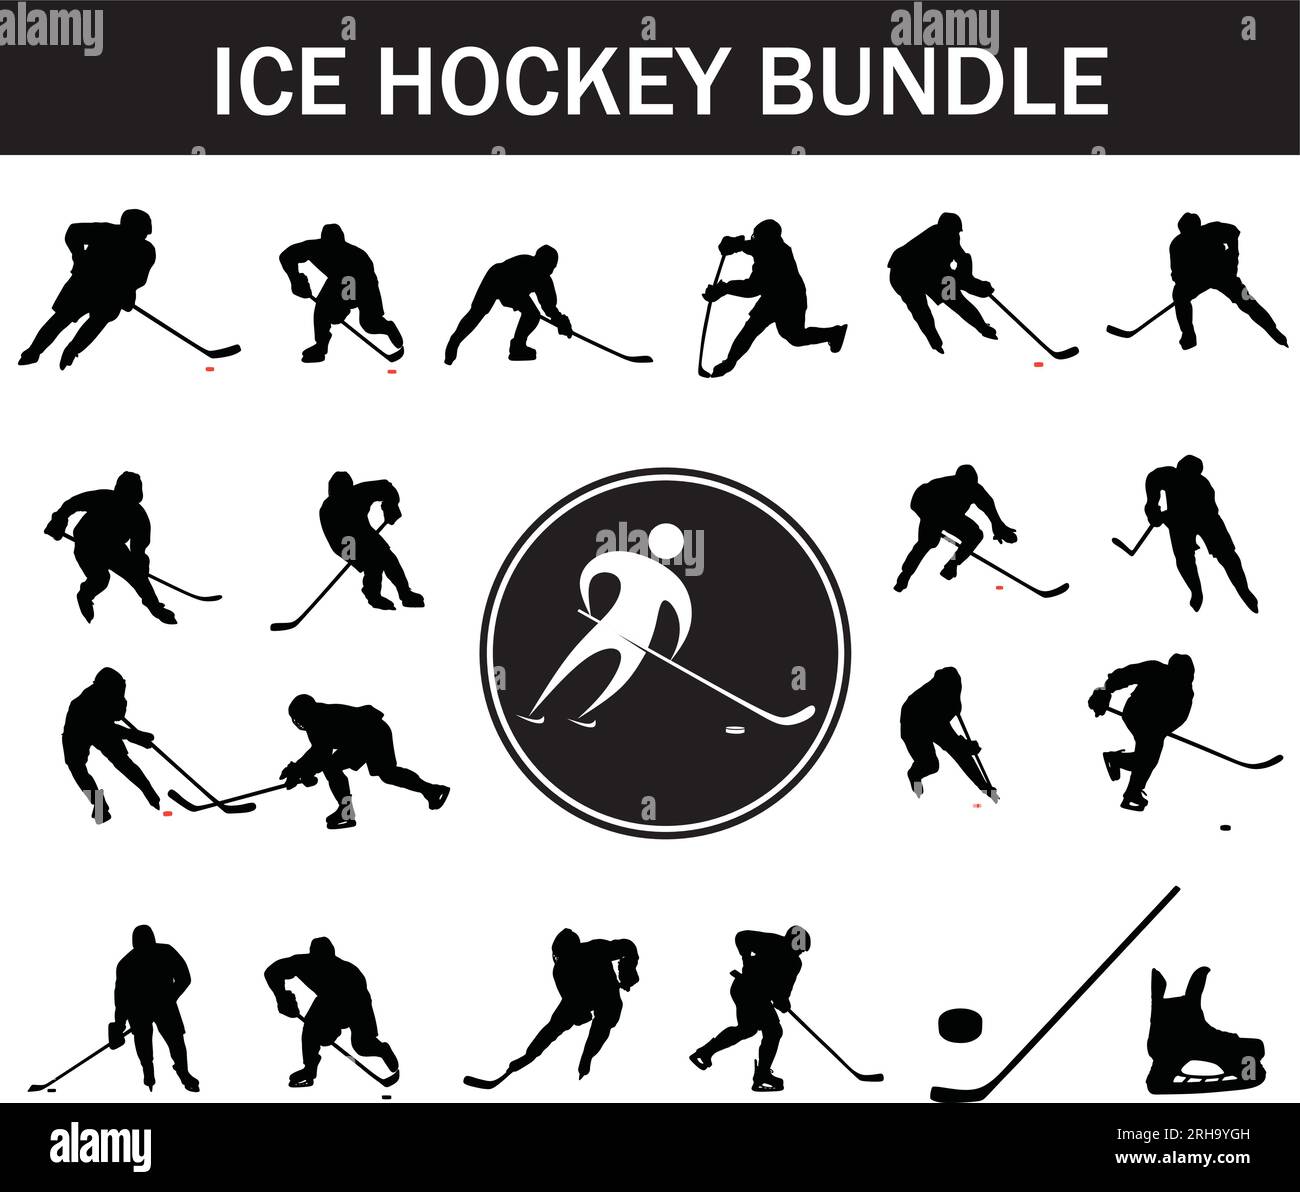 Ice Hockey Silhouette Bundle | Collection of Ice Hockey Players with Logo and Ice Hockey Equipment Stock Vector